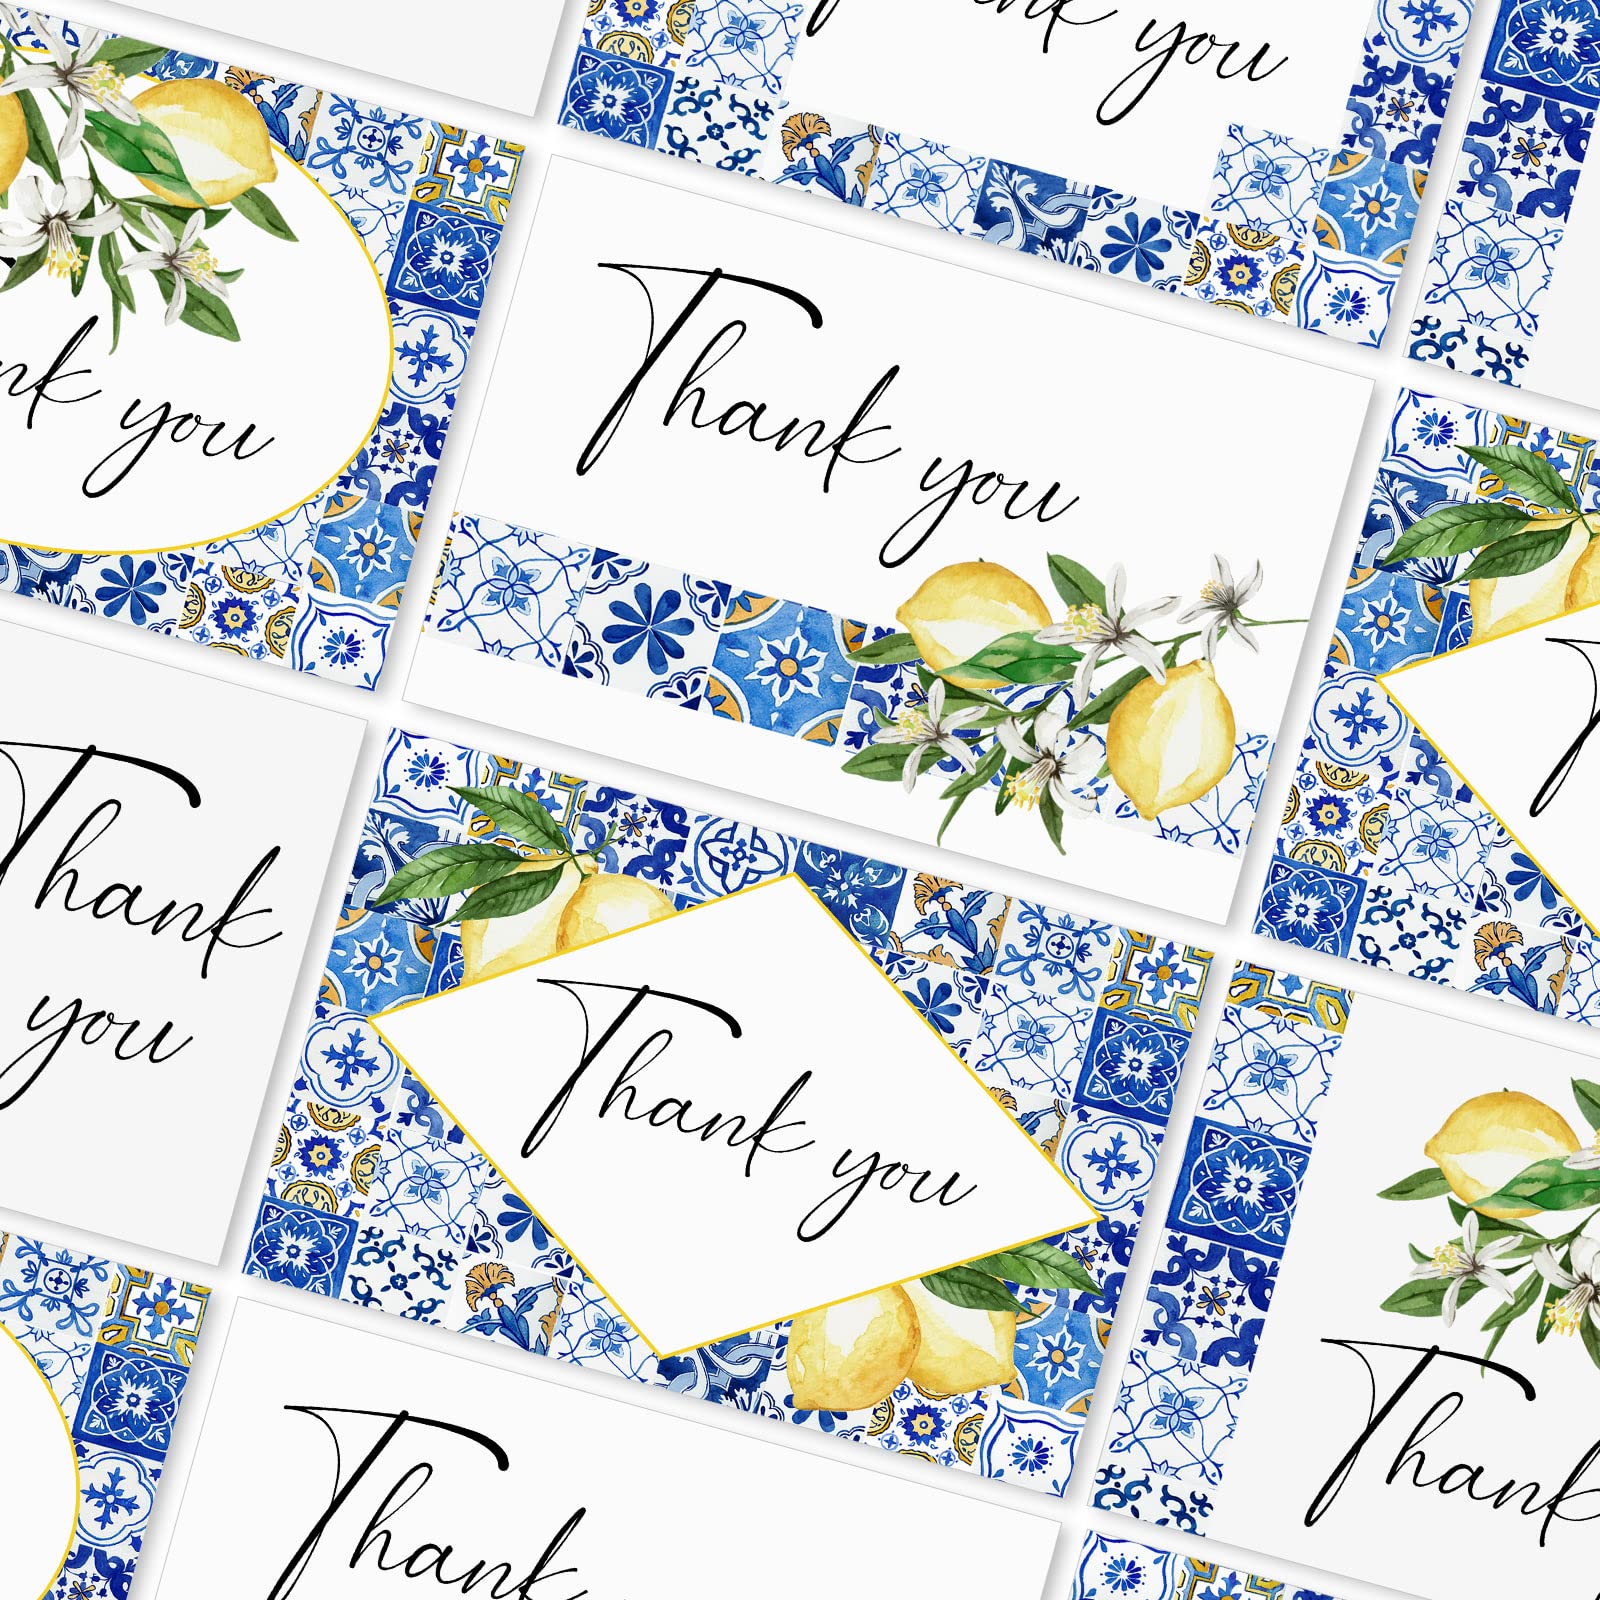 AnyDesign 36 Pack Lemon Thank You Cards Bulk Vintage Blue Tiles Lemon Thank You Note Cards with Stickers Envelopes Watercolor Greeting Cards for Baby Shower Wedding Birthday Party and All Occasion